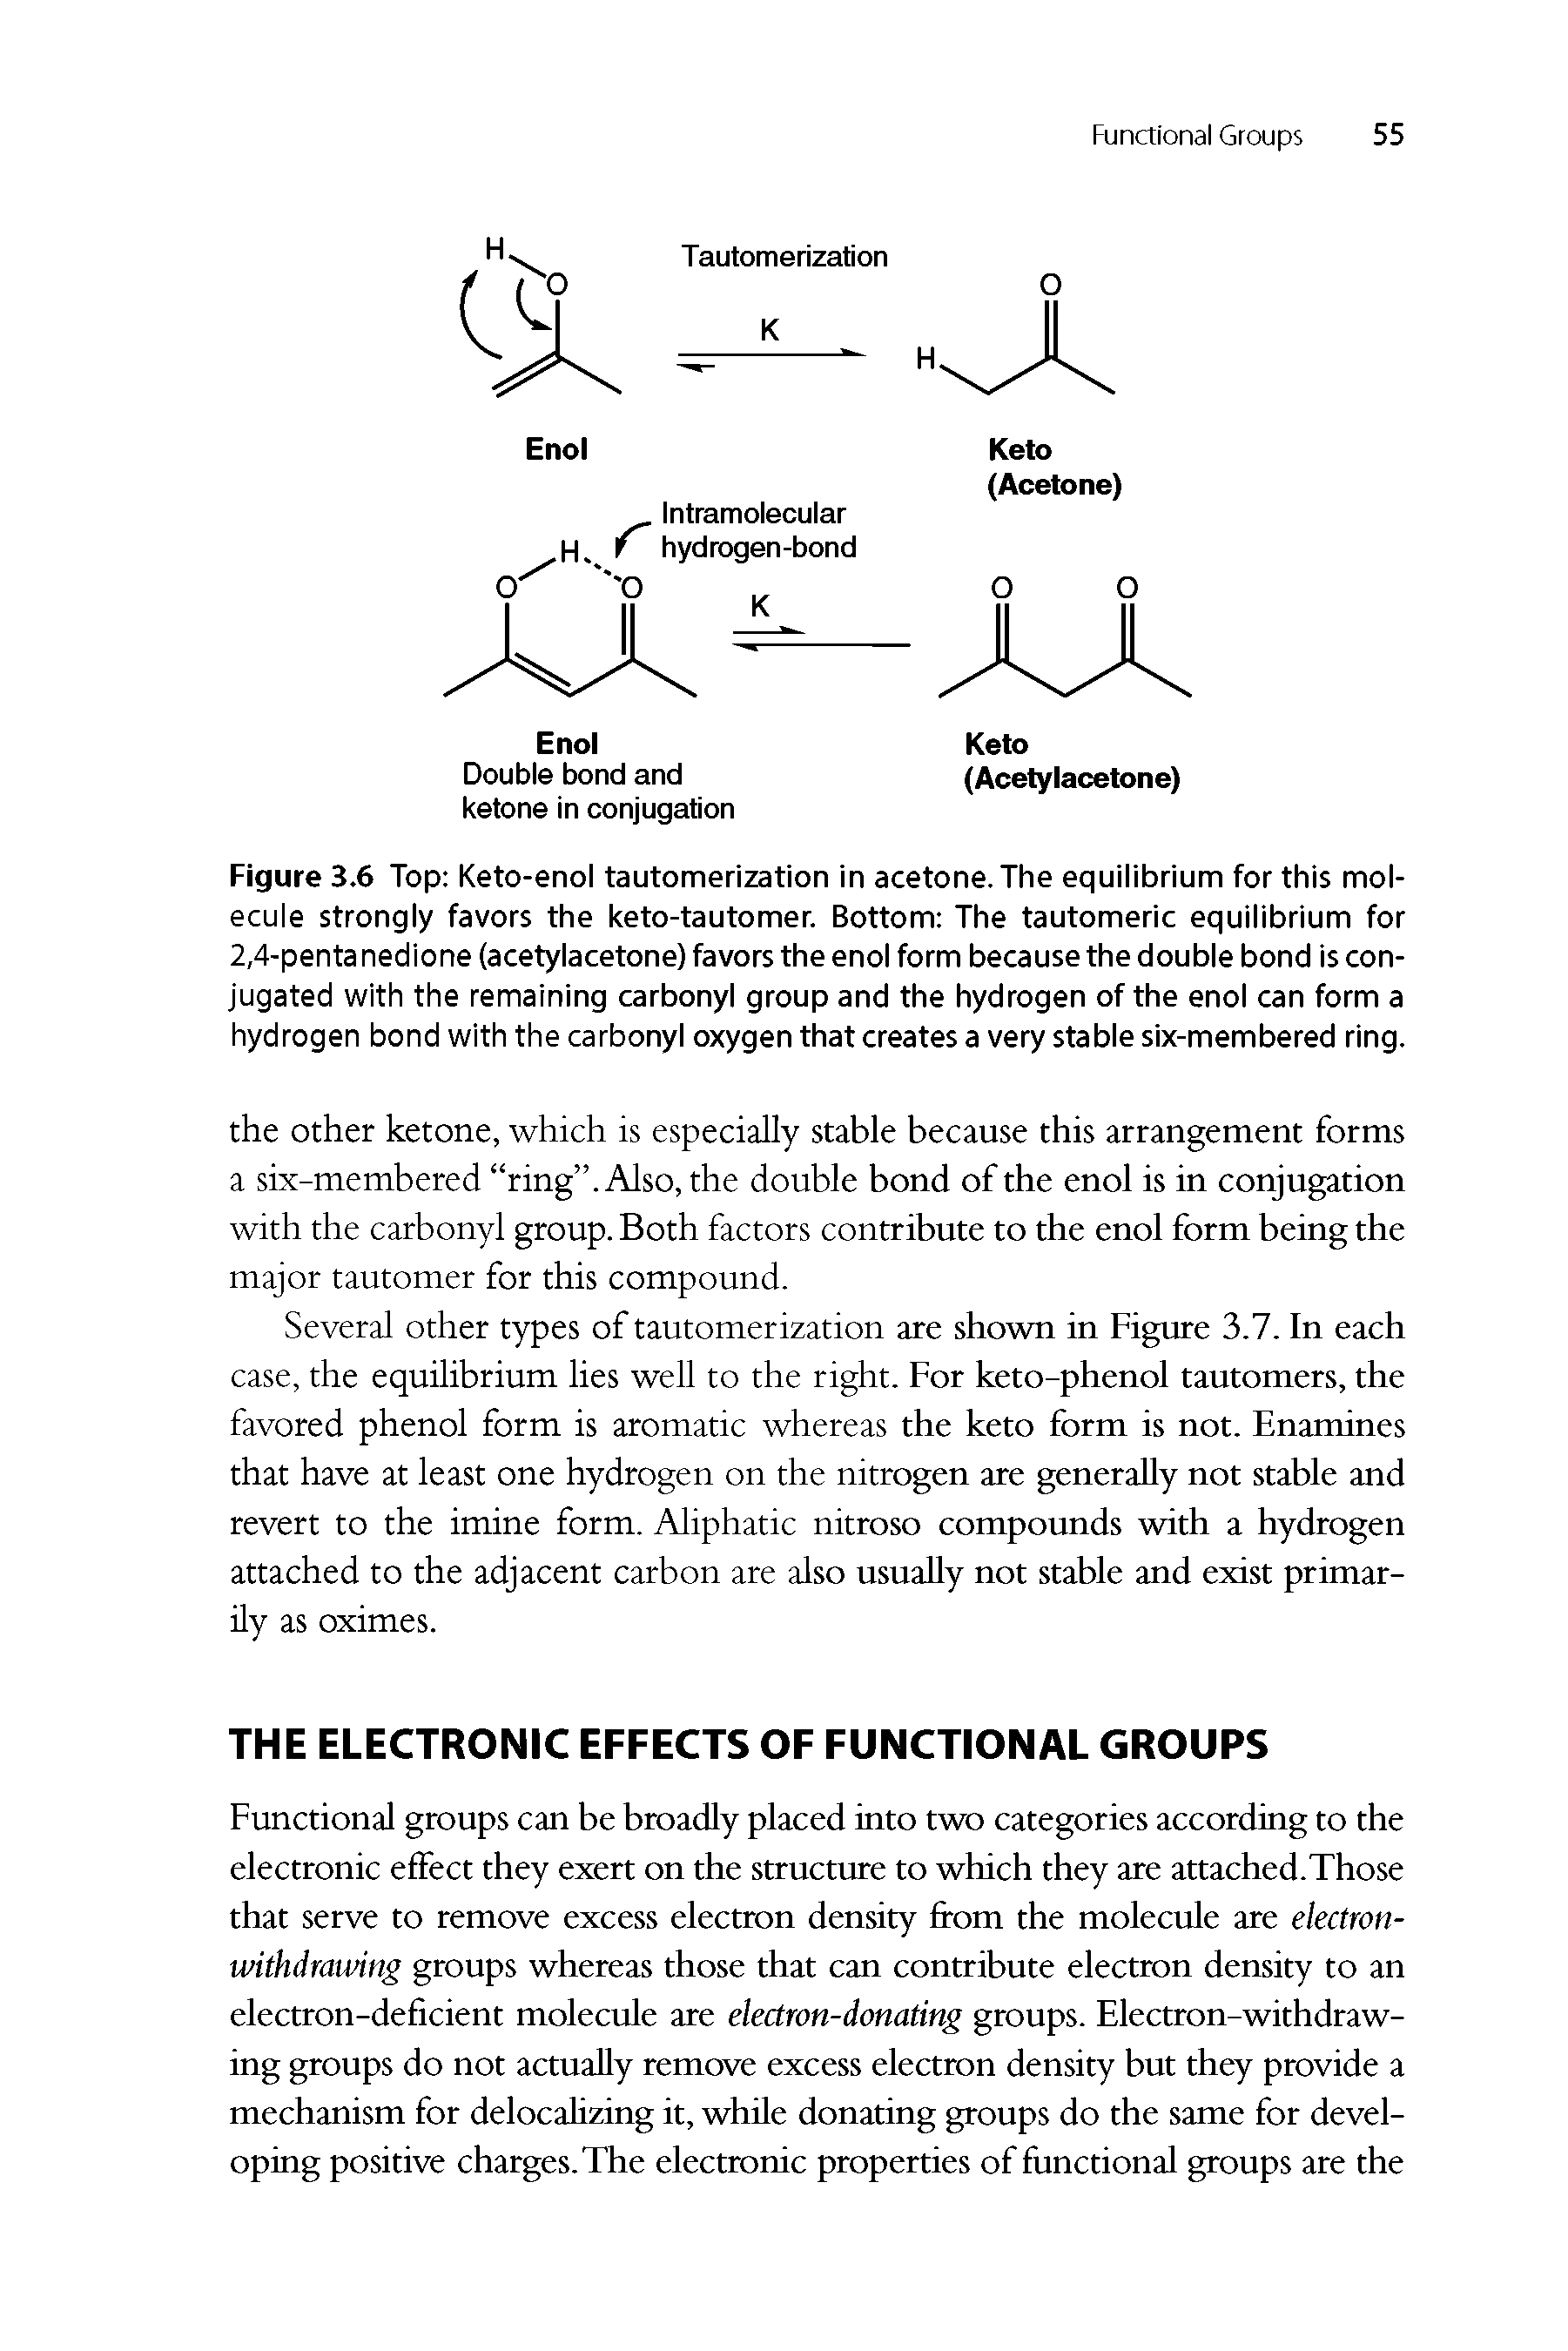 Figure 3.6 Top Keto-enol tautomerization in acetone. The equilibrium for this molecule strongly favors the keto-tautomer. Bottom The tautomeric equilibrium for 2,4-pentanedione (acetylacetone) favors the enol form because the double bond is conjugated with the remaining carbonyl group and the hydrogen of the enol can form a hydrogen bond with the carbonyl oxygen that creates a very stable six-membered ring.